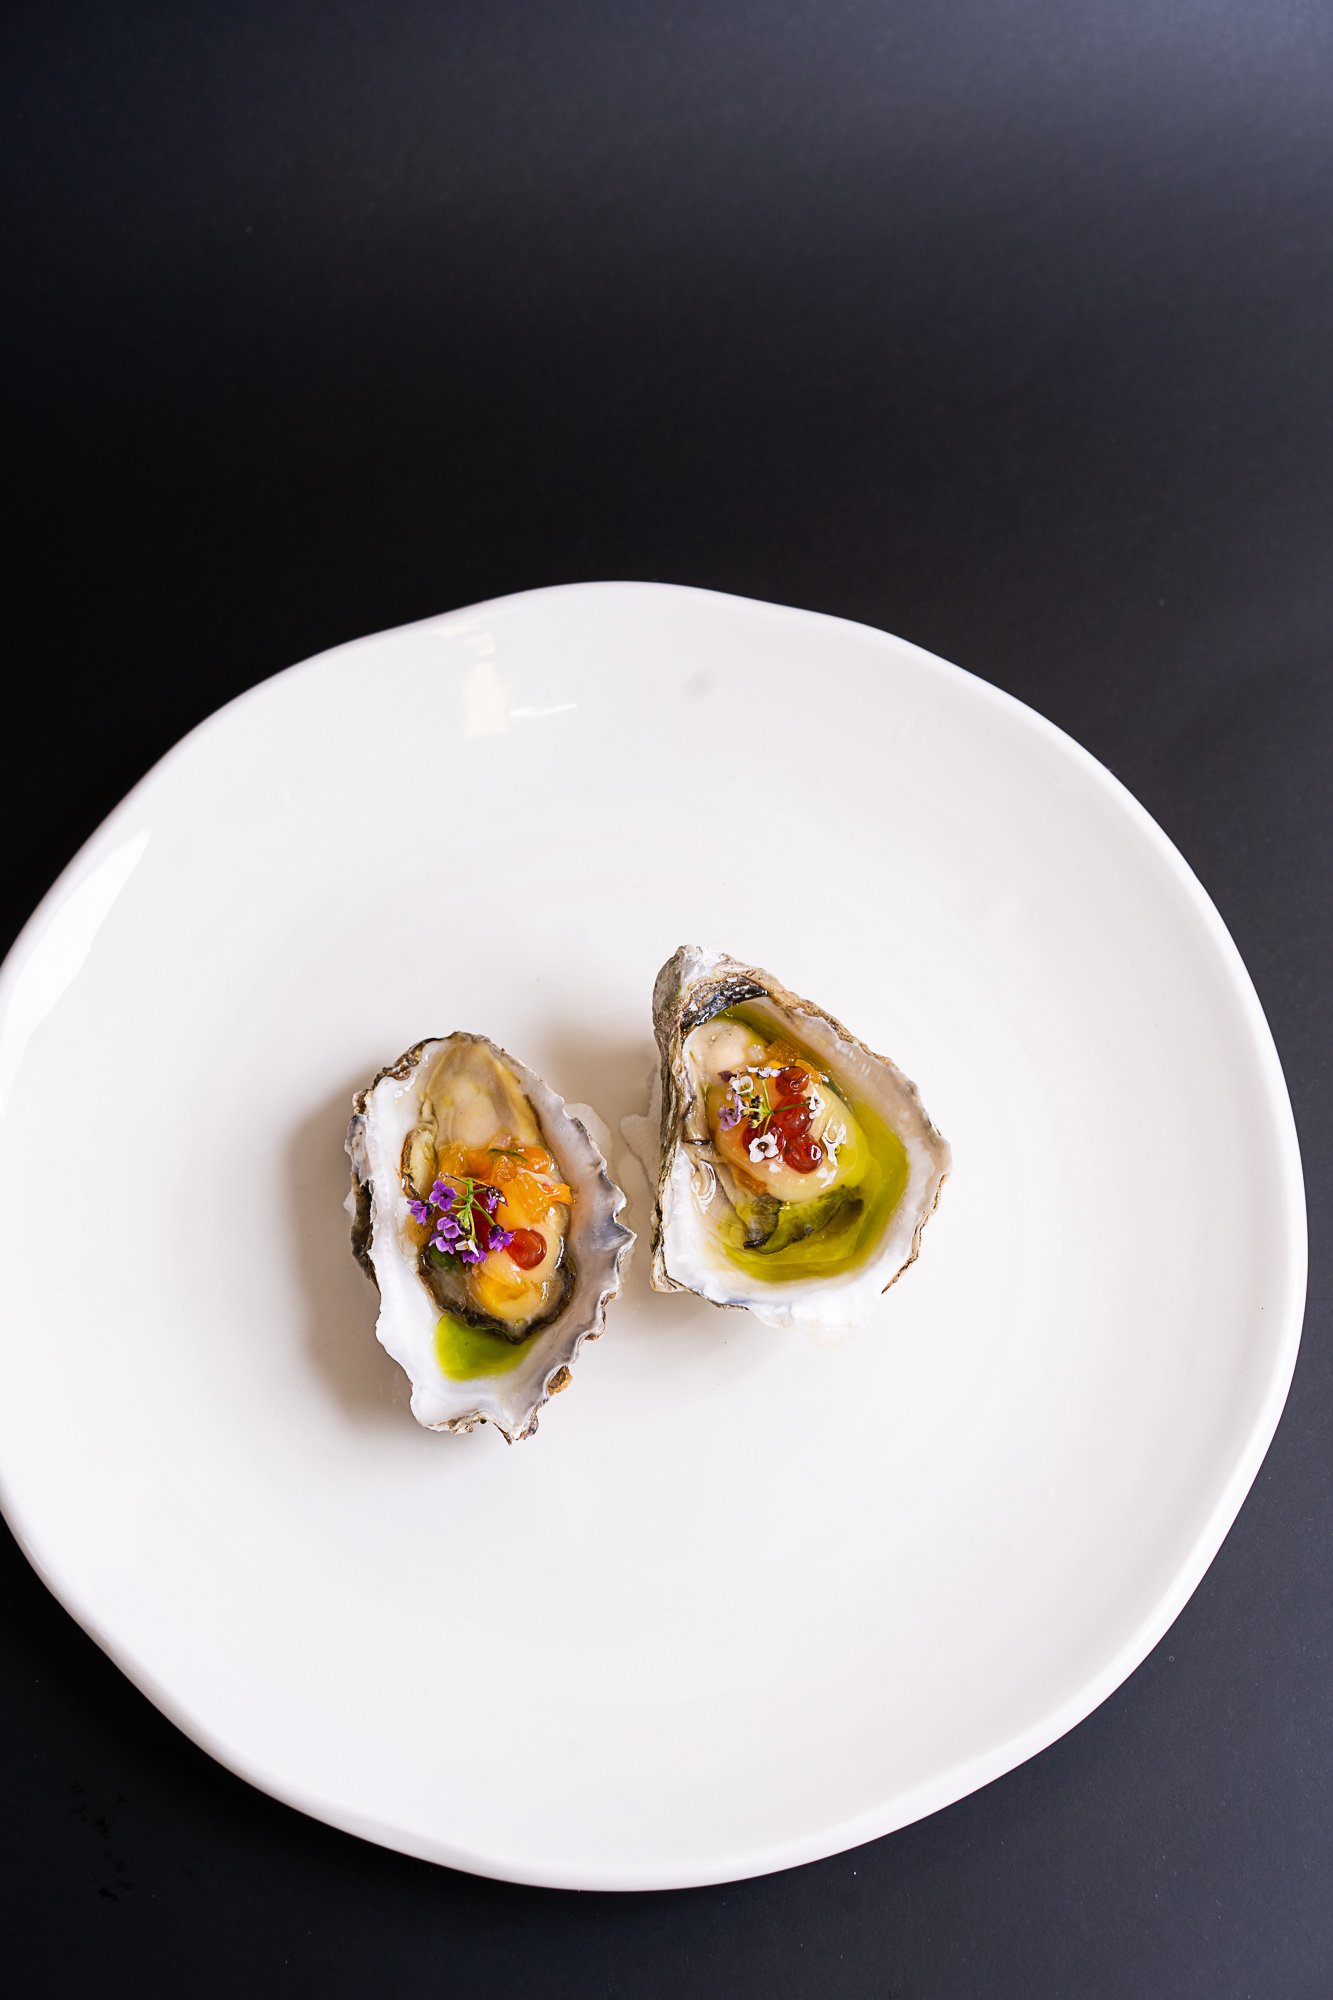 Ostrica con mela - oysters with persimmon, chili and avruga caviar, at LBP&S.jpg